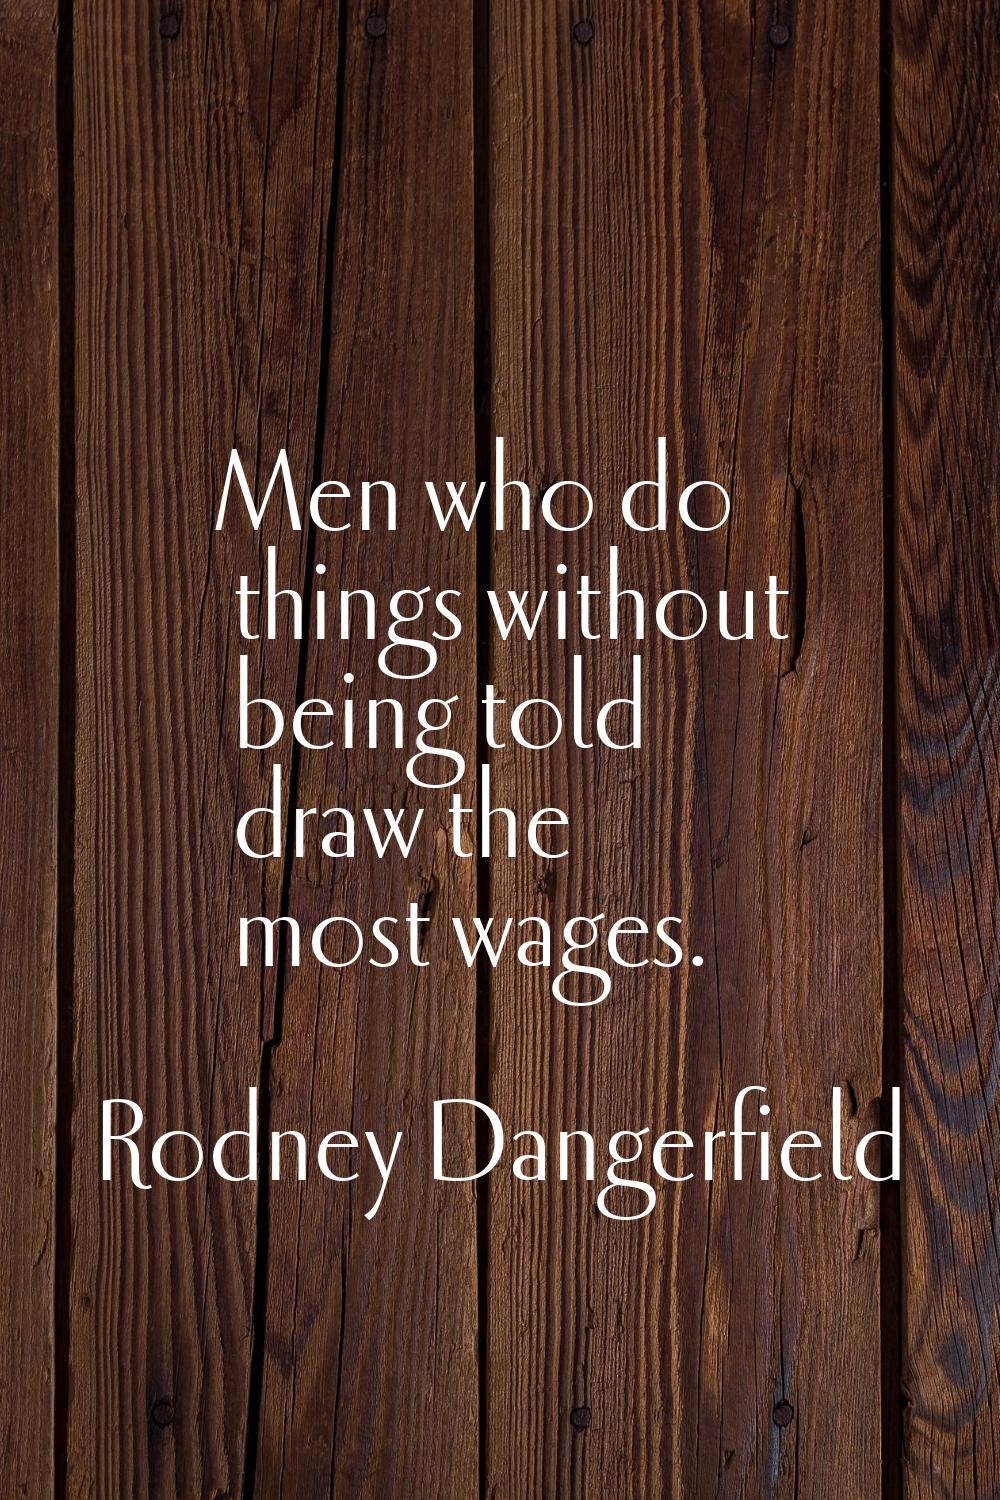 Men who do things without being told draw the most wages.